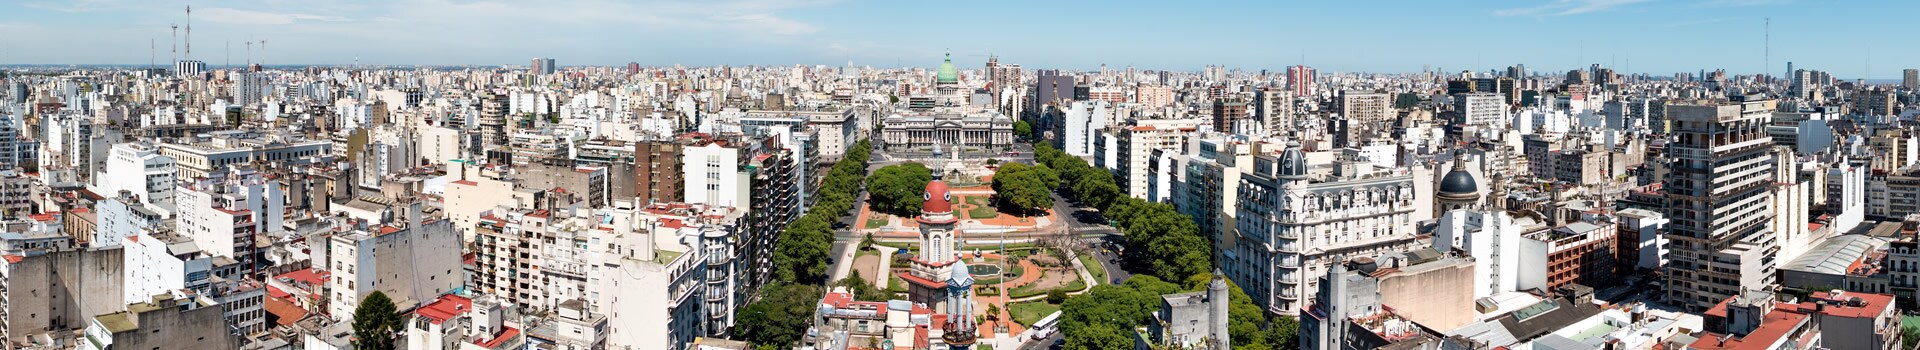 Buenos aires intl